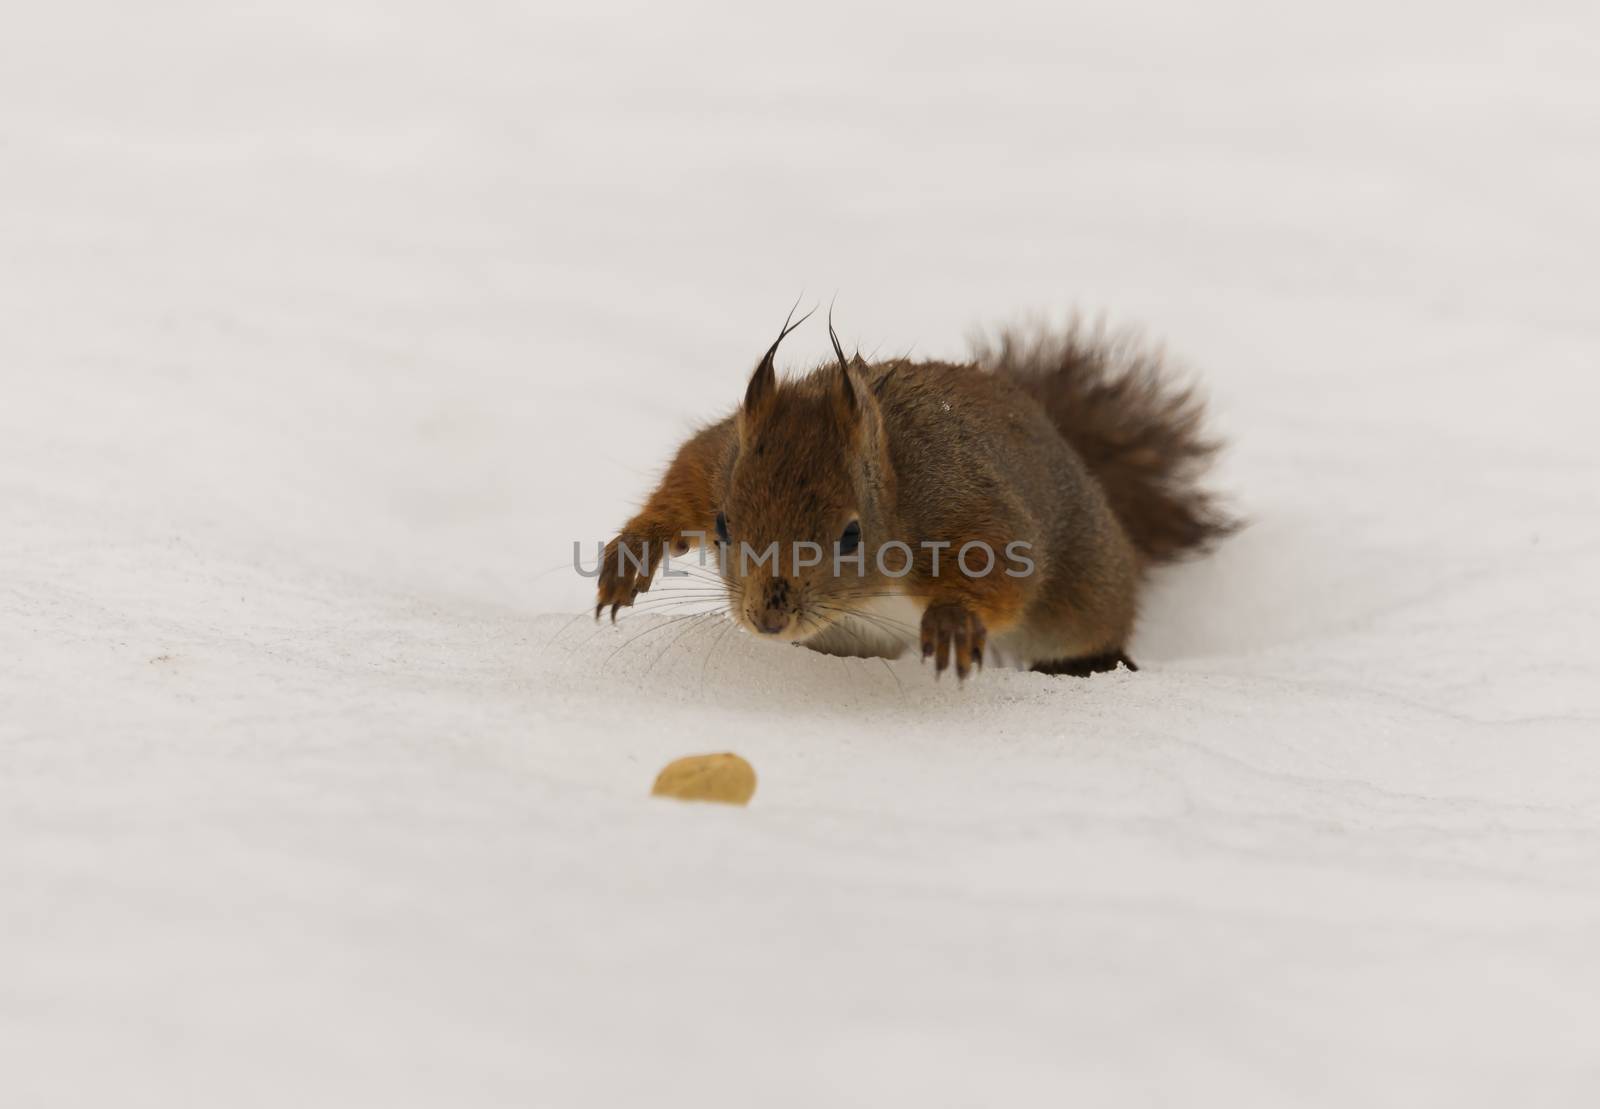 Red squirrel finding a nut in snow by GryT